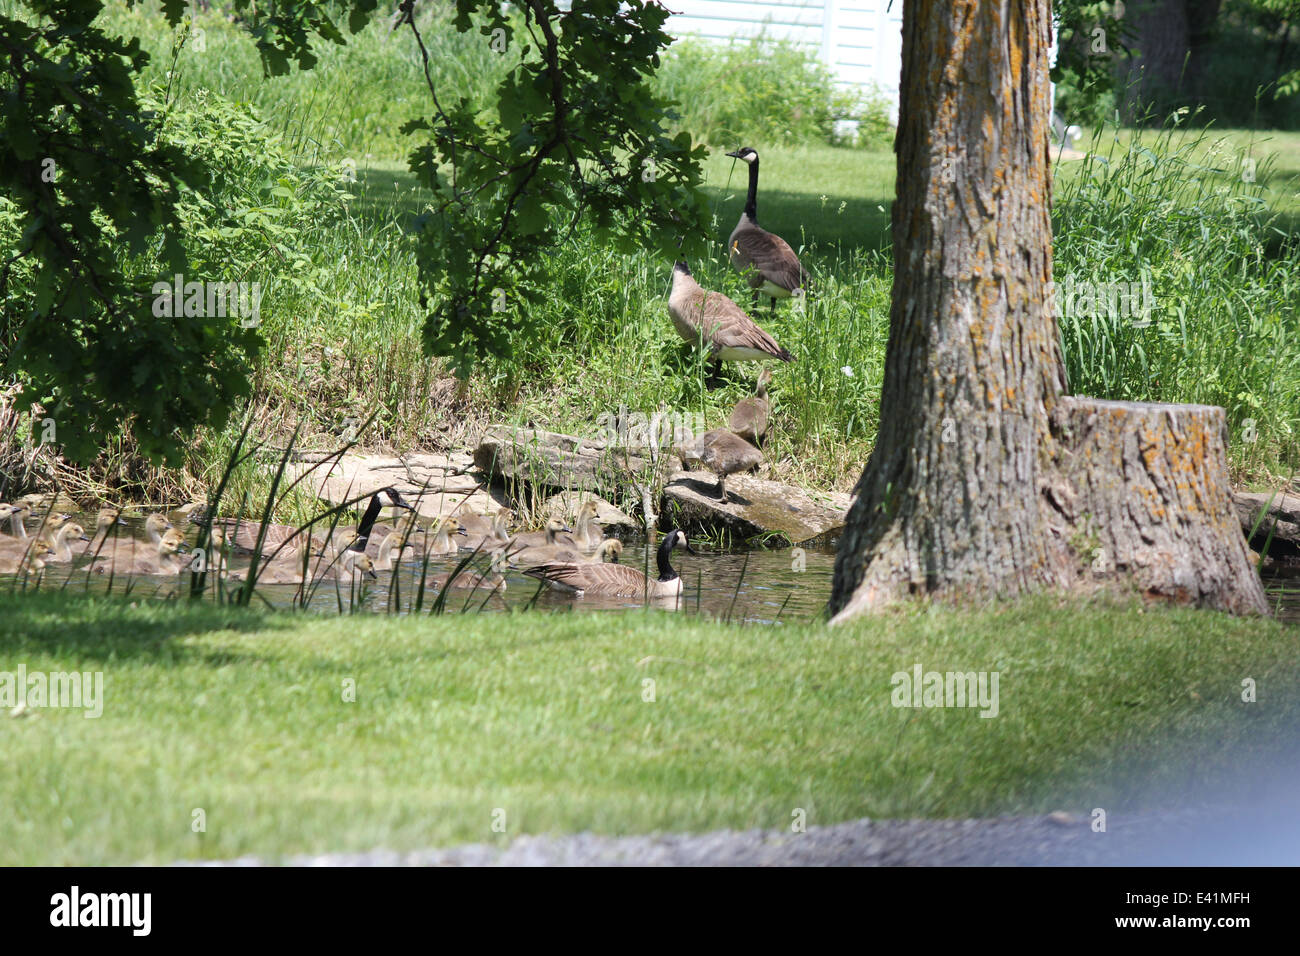 Canada geese, with fuzzy gosling's in the water and on shore. The Canada goose is native to North America. Stock Photo